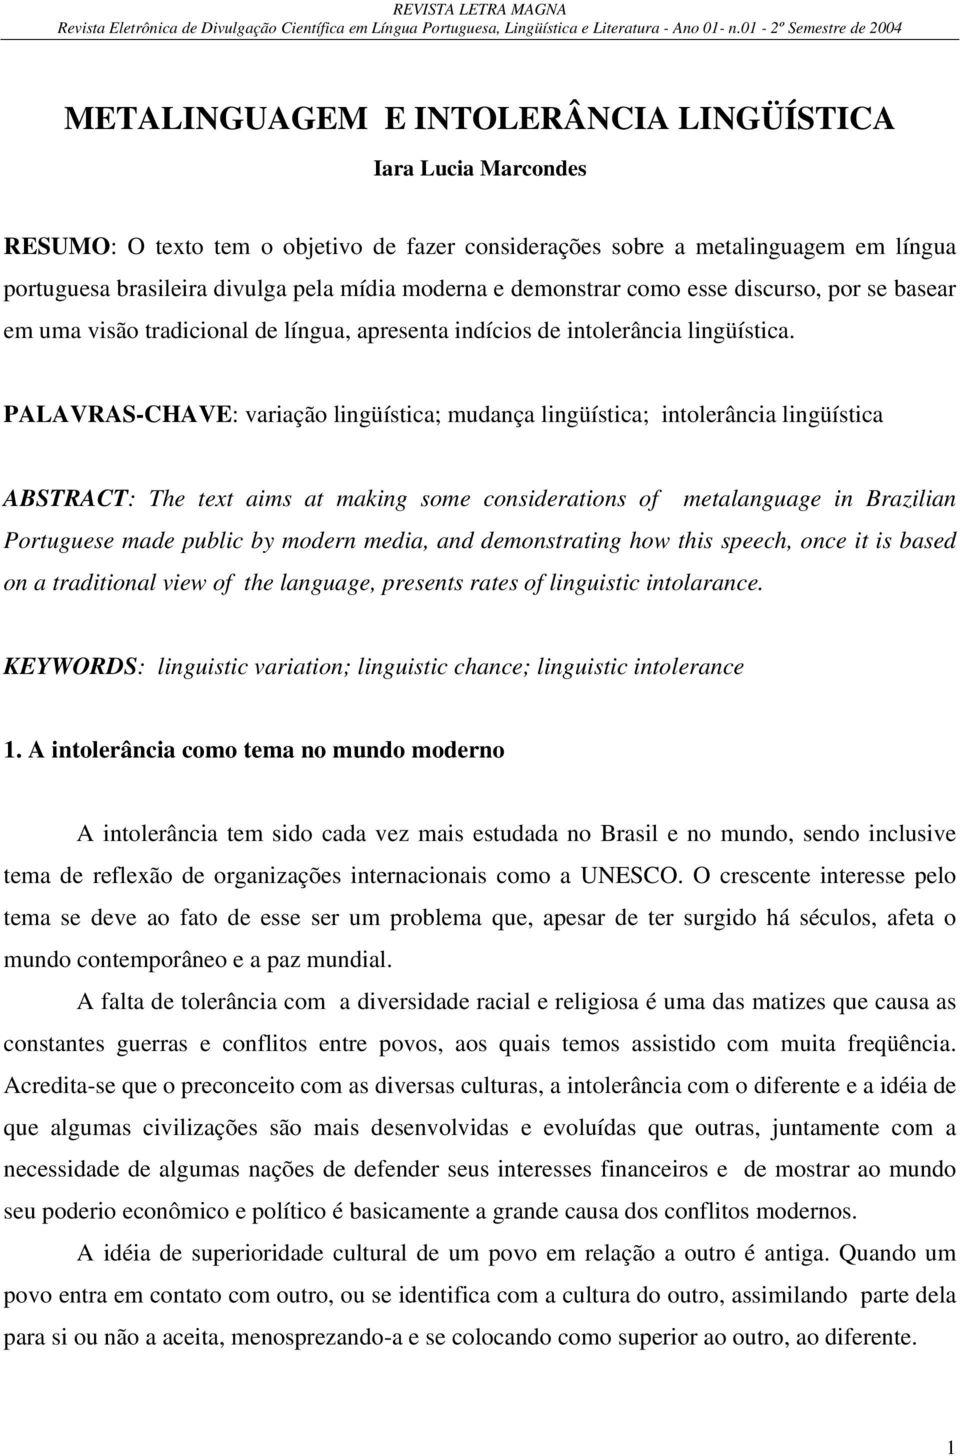 PALAVRAS-CHAVE: variação lingüística; mudança lingüística; intolerância lingüística ABSTRACT: The text aims at making some considerations of metalanguage in Brazilian Portuguese made public by modern